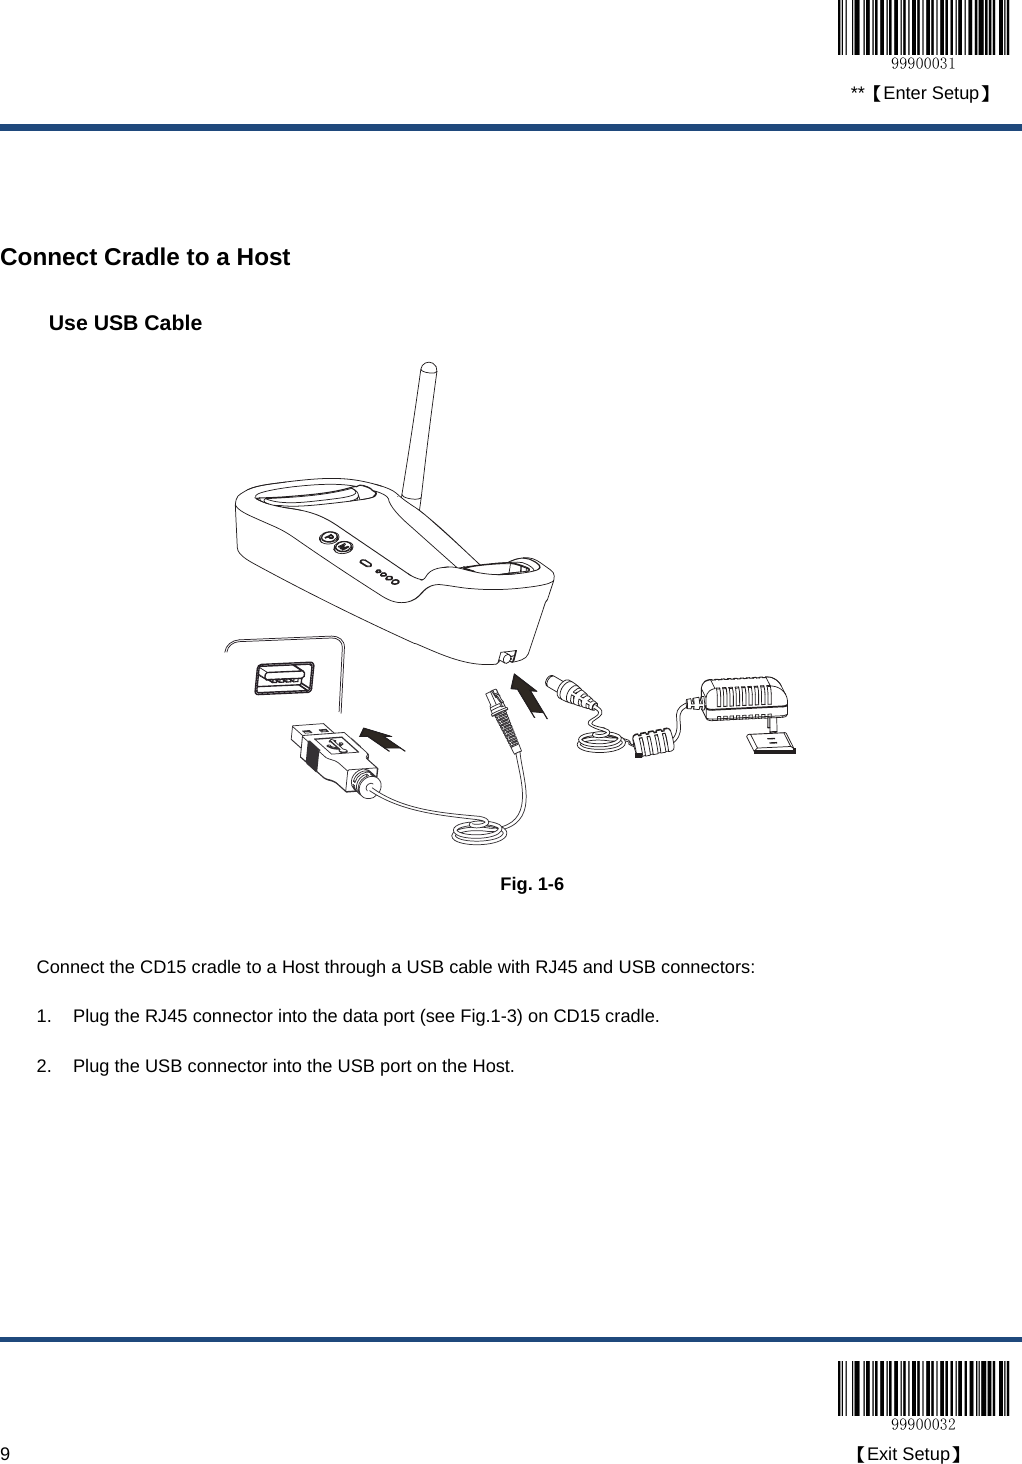  **【Enter Setup】  9                                                                                                                                                                                        【Exit Setup】   Connect Cradle to a Host Use USB Cable  Fig. 1-6  Connect the CD15 cradle to a Host through a USB cable with RJ45 and USB connectors: 1.  Plug the RJ45 connector into the data port (see Fig.1-3) on CD15 cradle. 2.  Plug the USB connector into the USB port on the Host. 